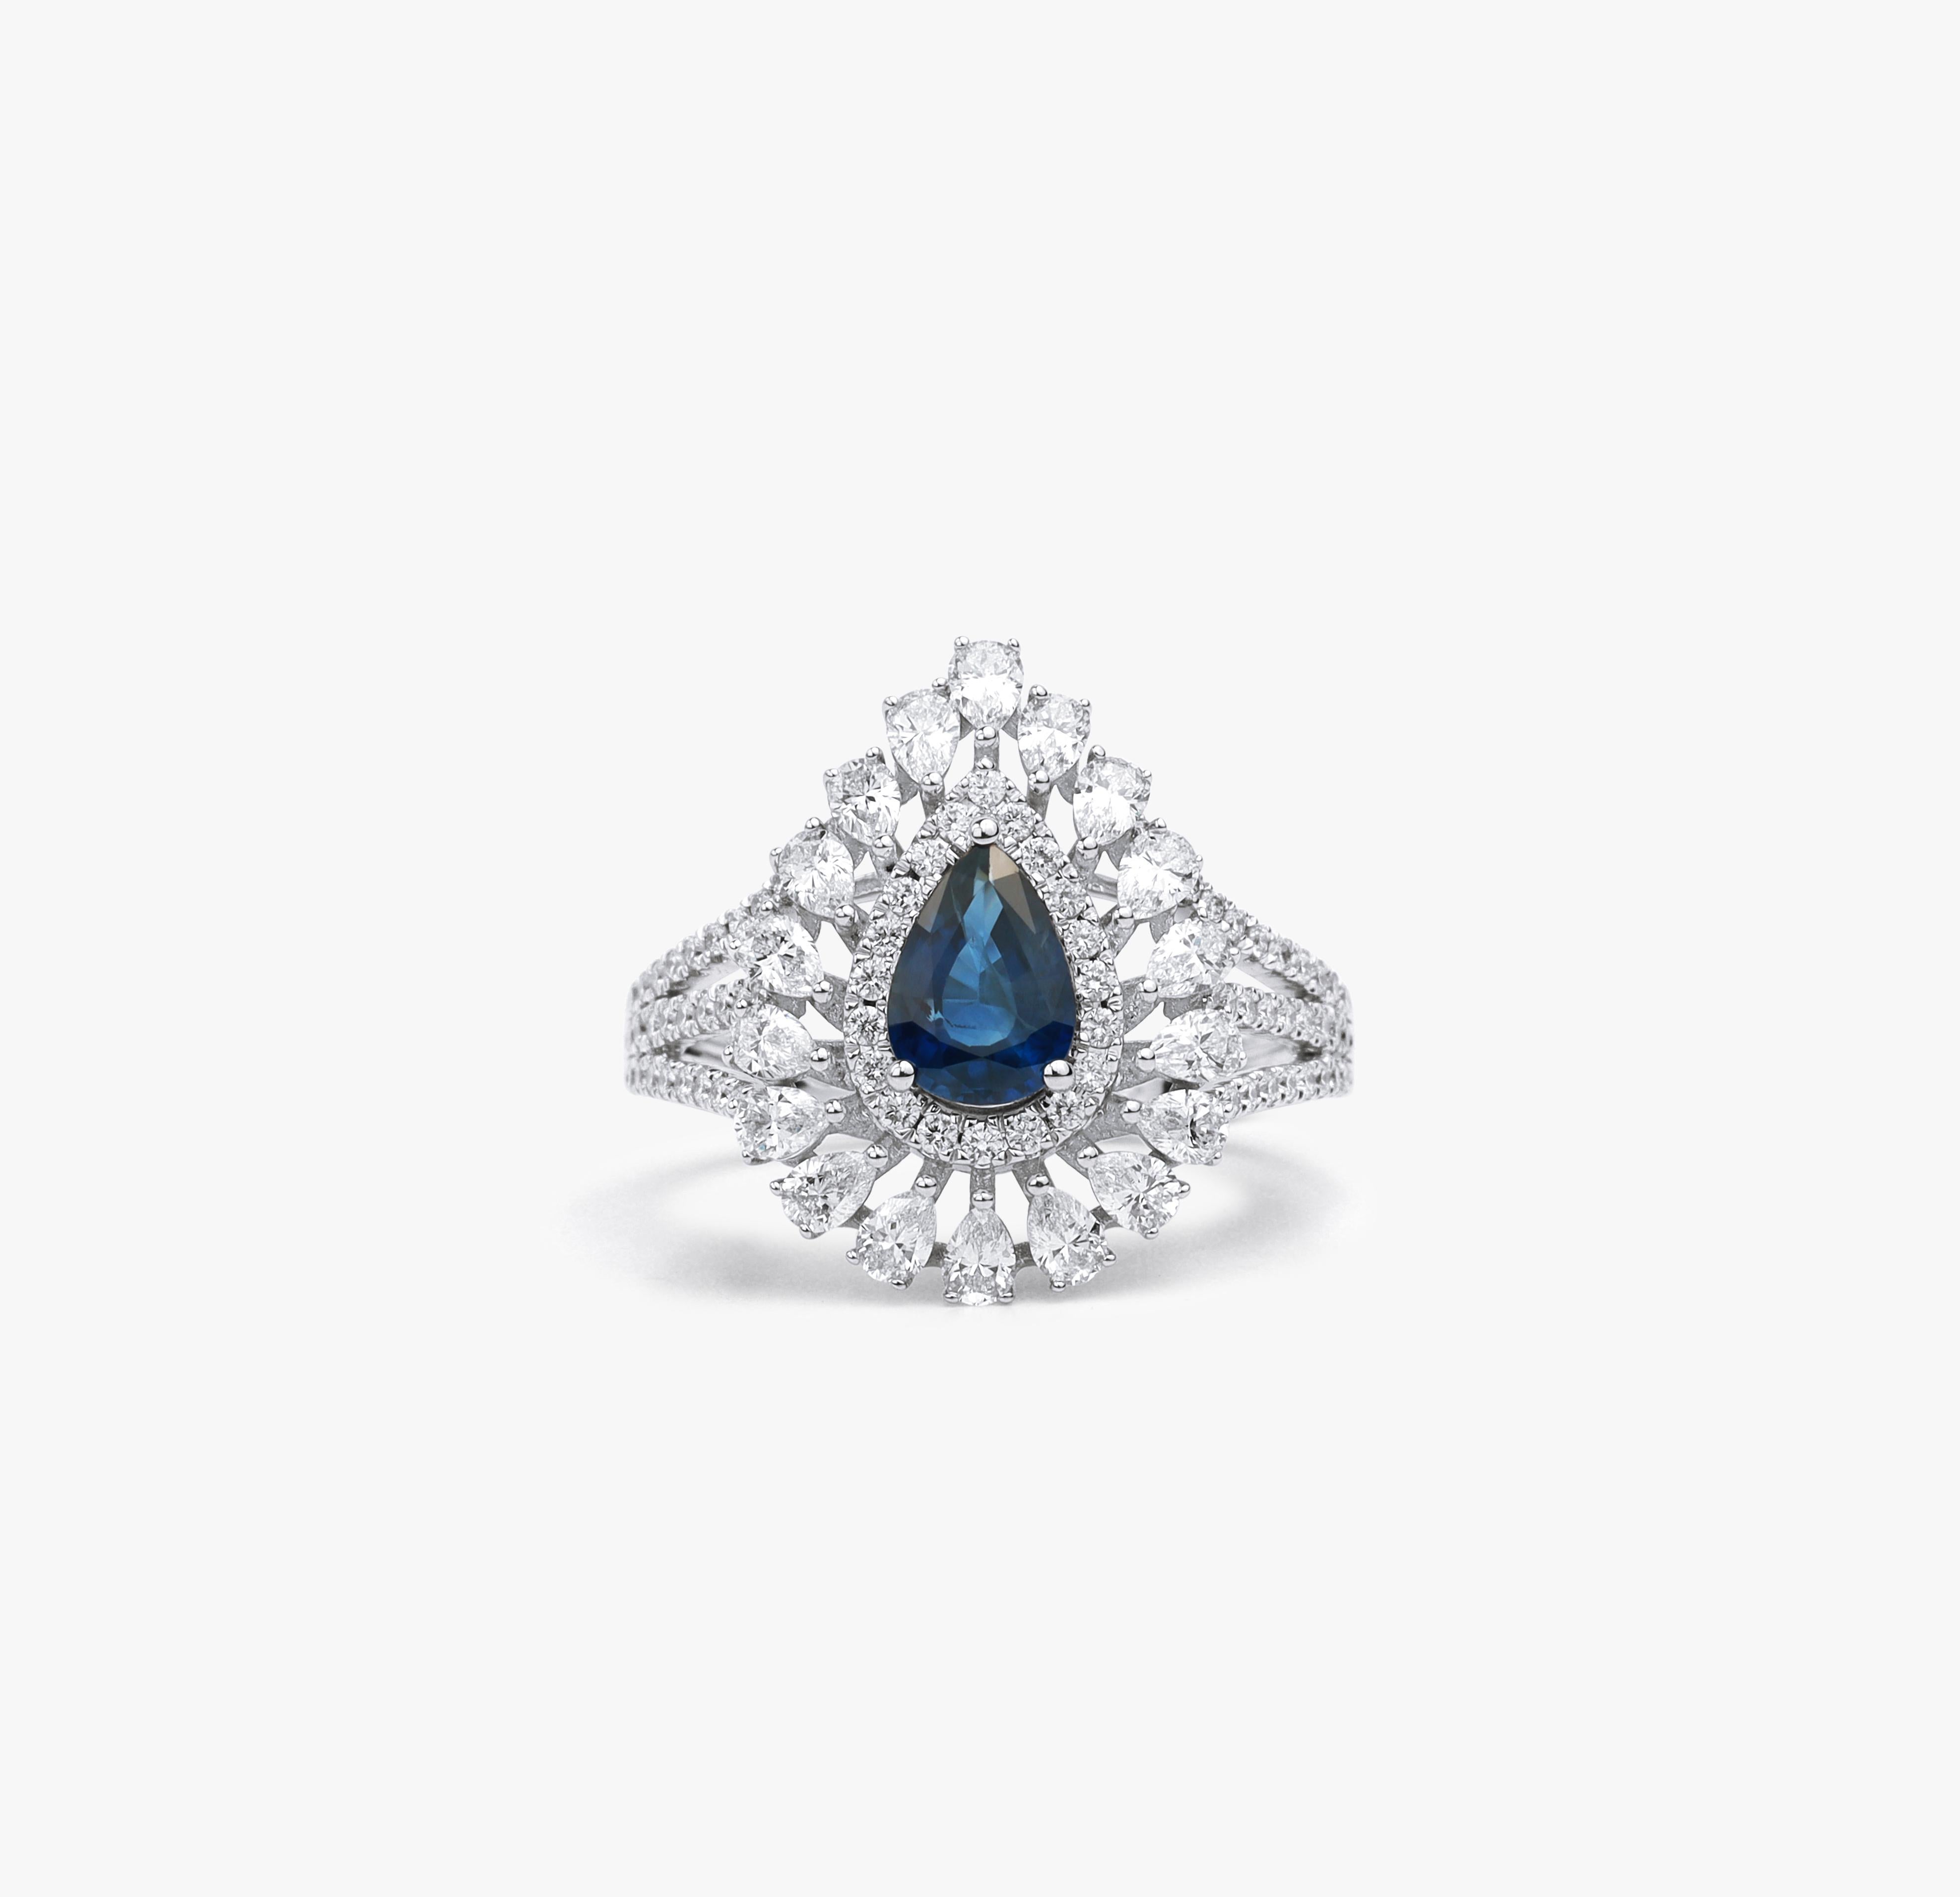 Pear Blue Sapphire Diamond Double Halo Cocktail Engagement Proposal Ring For Her

Available in 18k white gold.

Same design can be made also with other custom gemstones per request.

Product details:

- Solid gold

- Diamond - approx. 1.3 carat

-